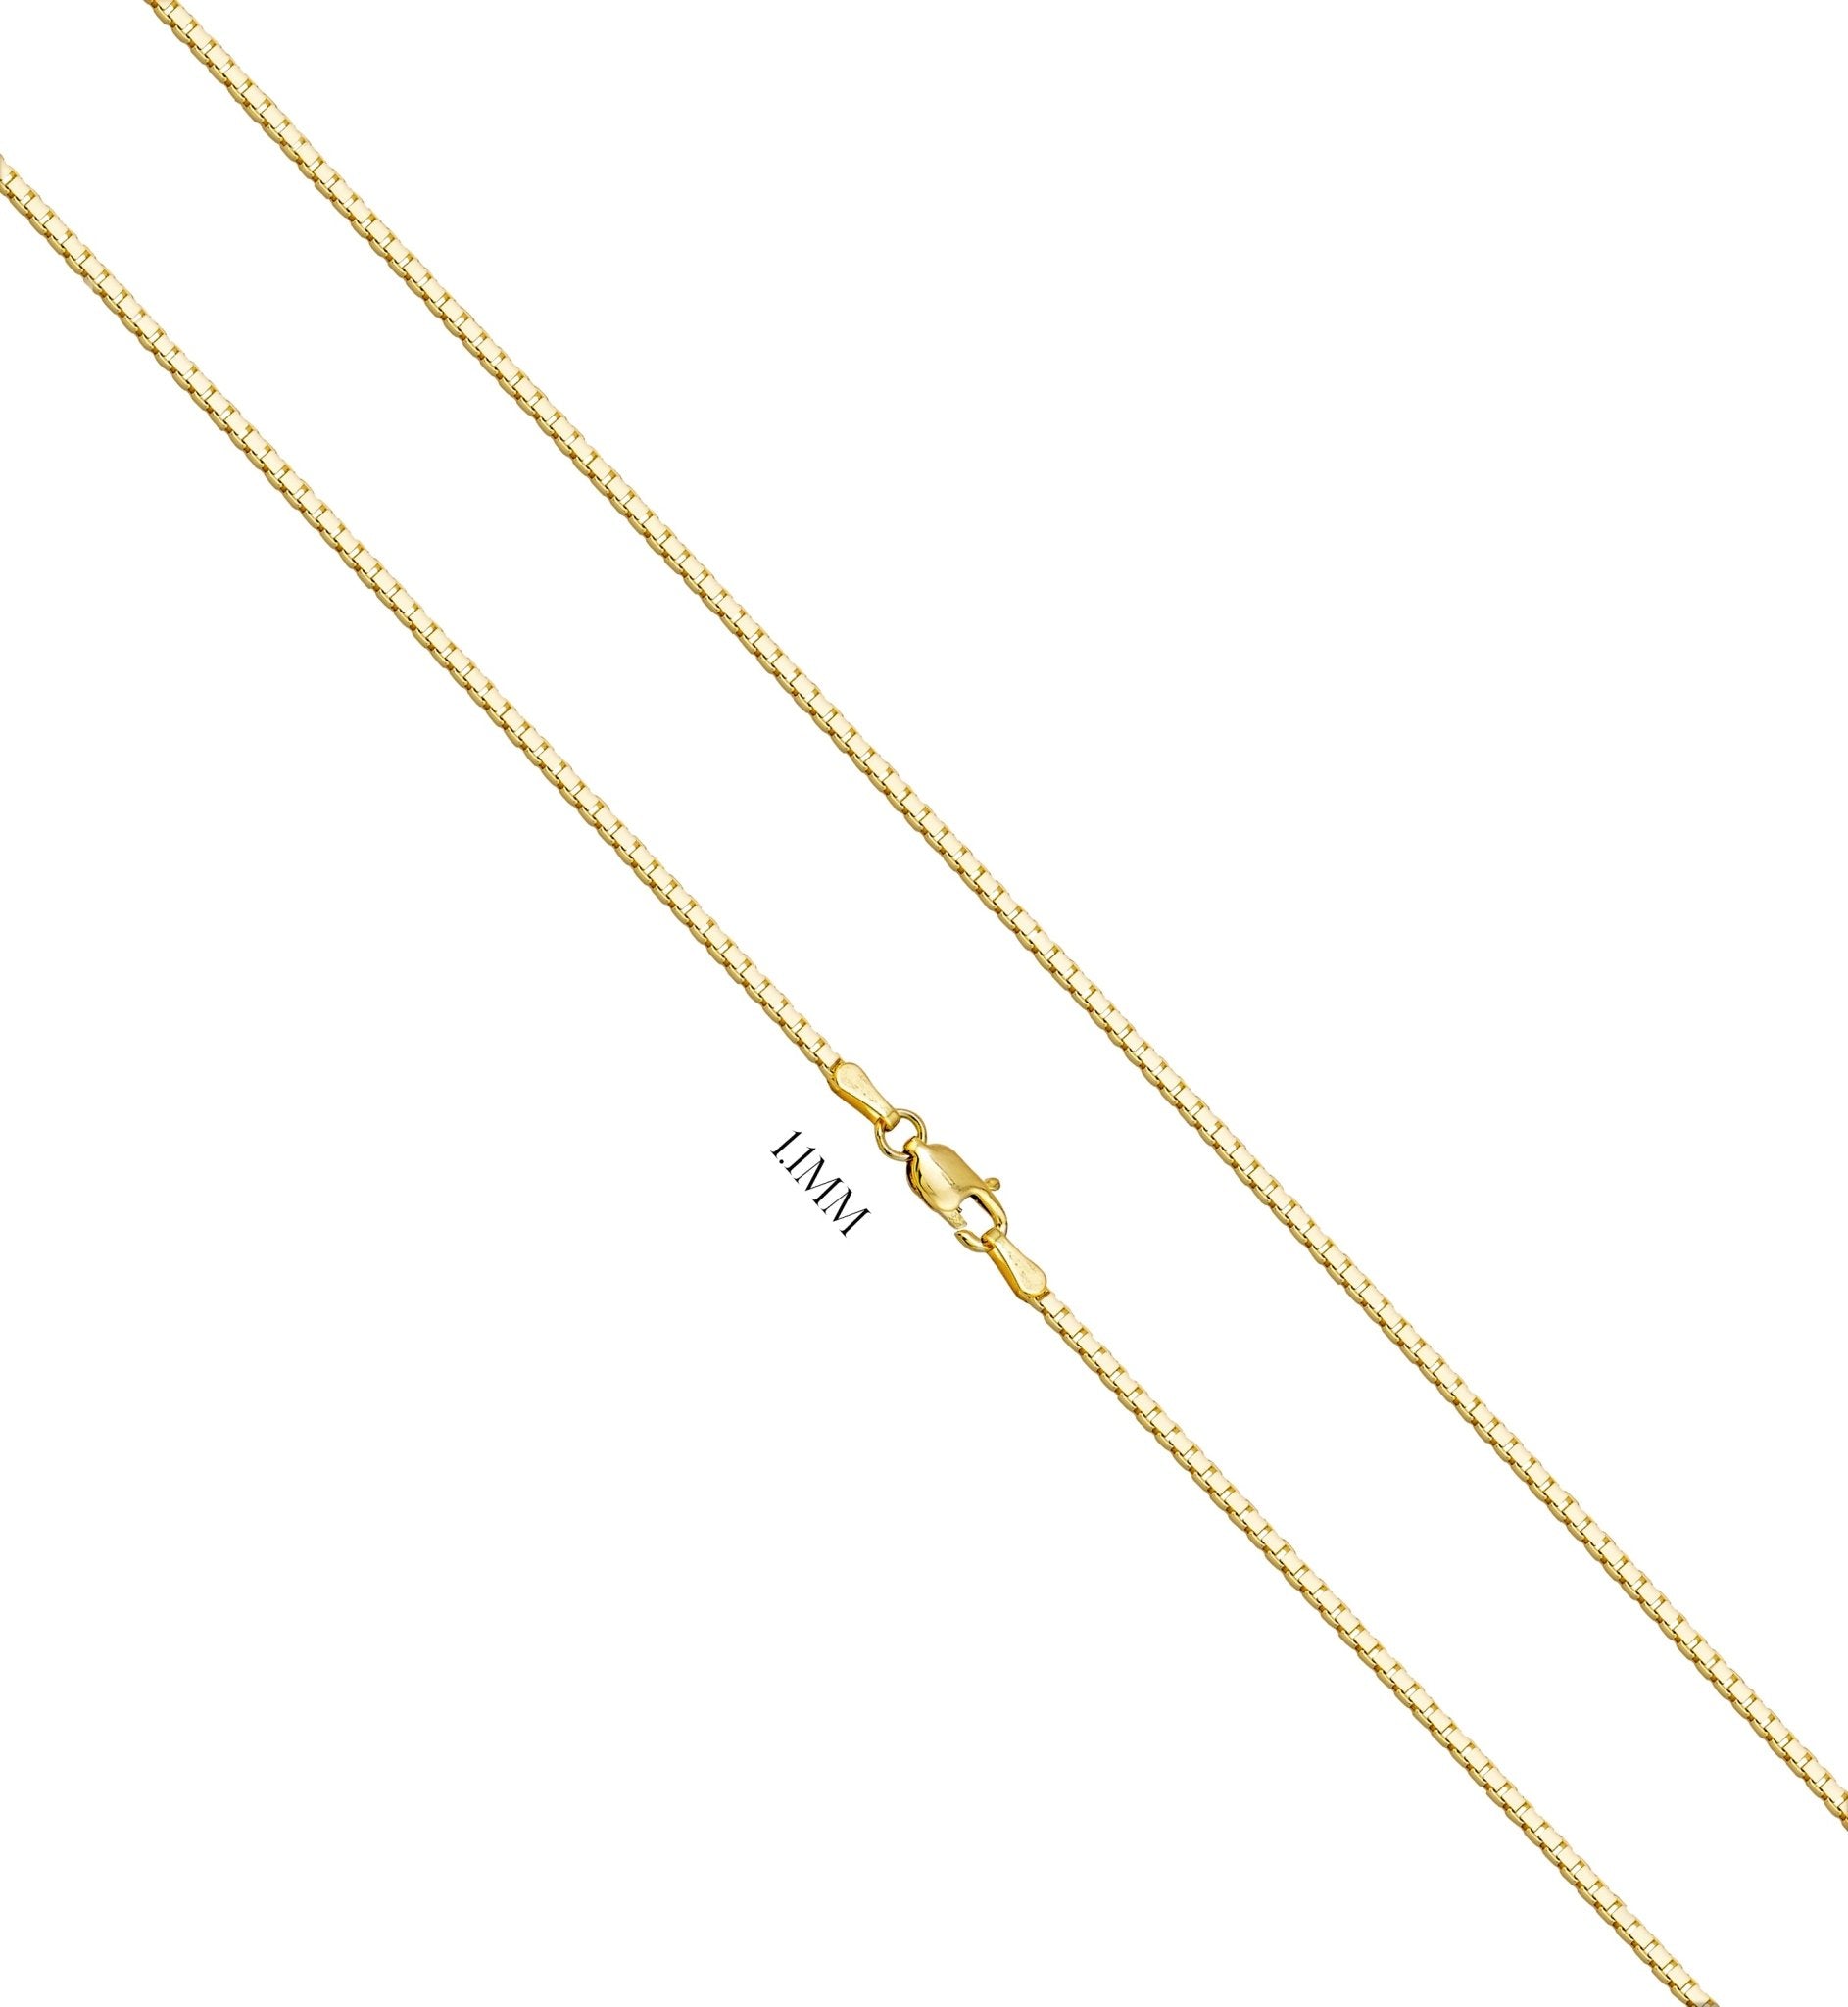 Box Chain - Gold Chain Necklace With Lobster Claw Clasp